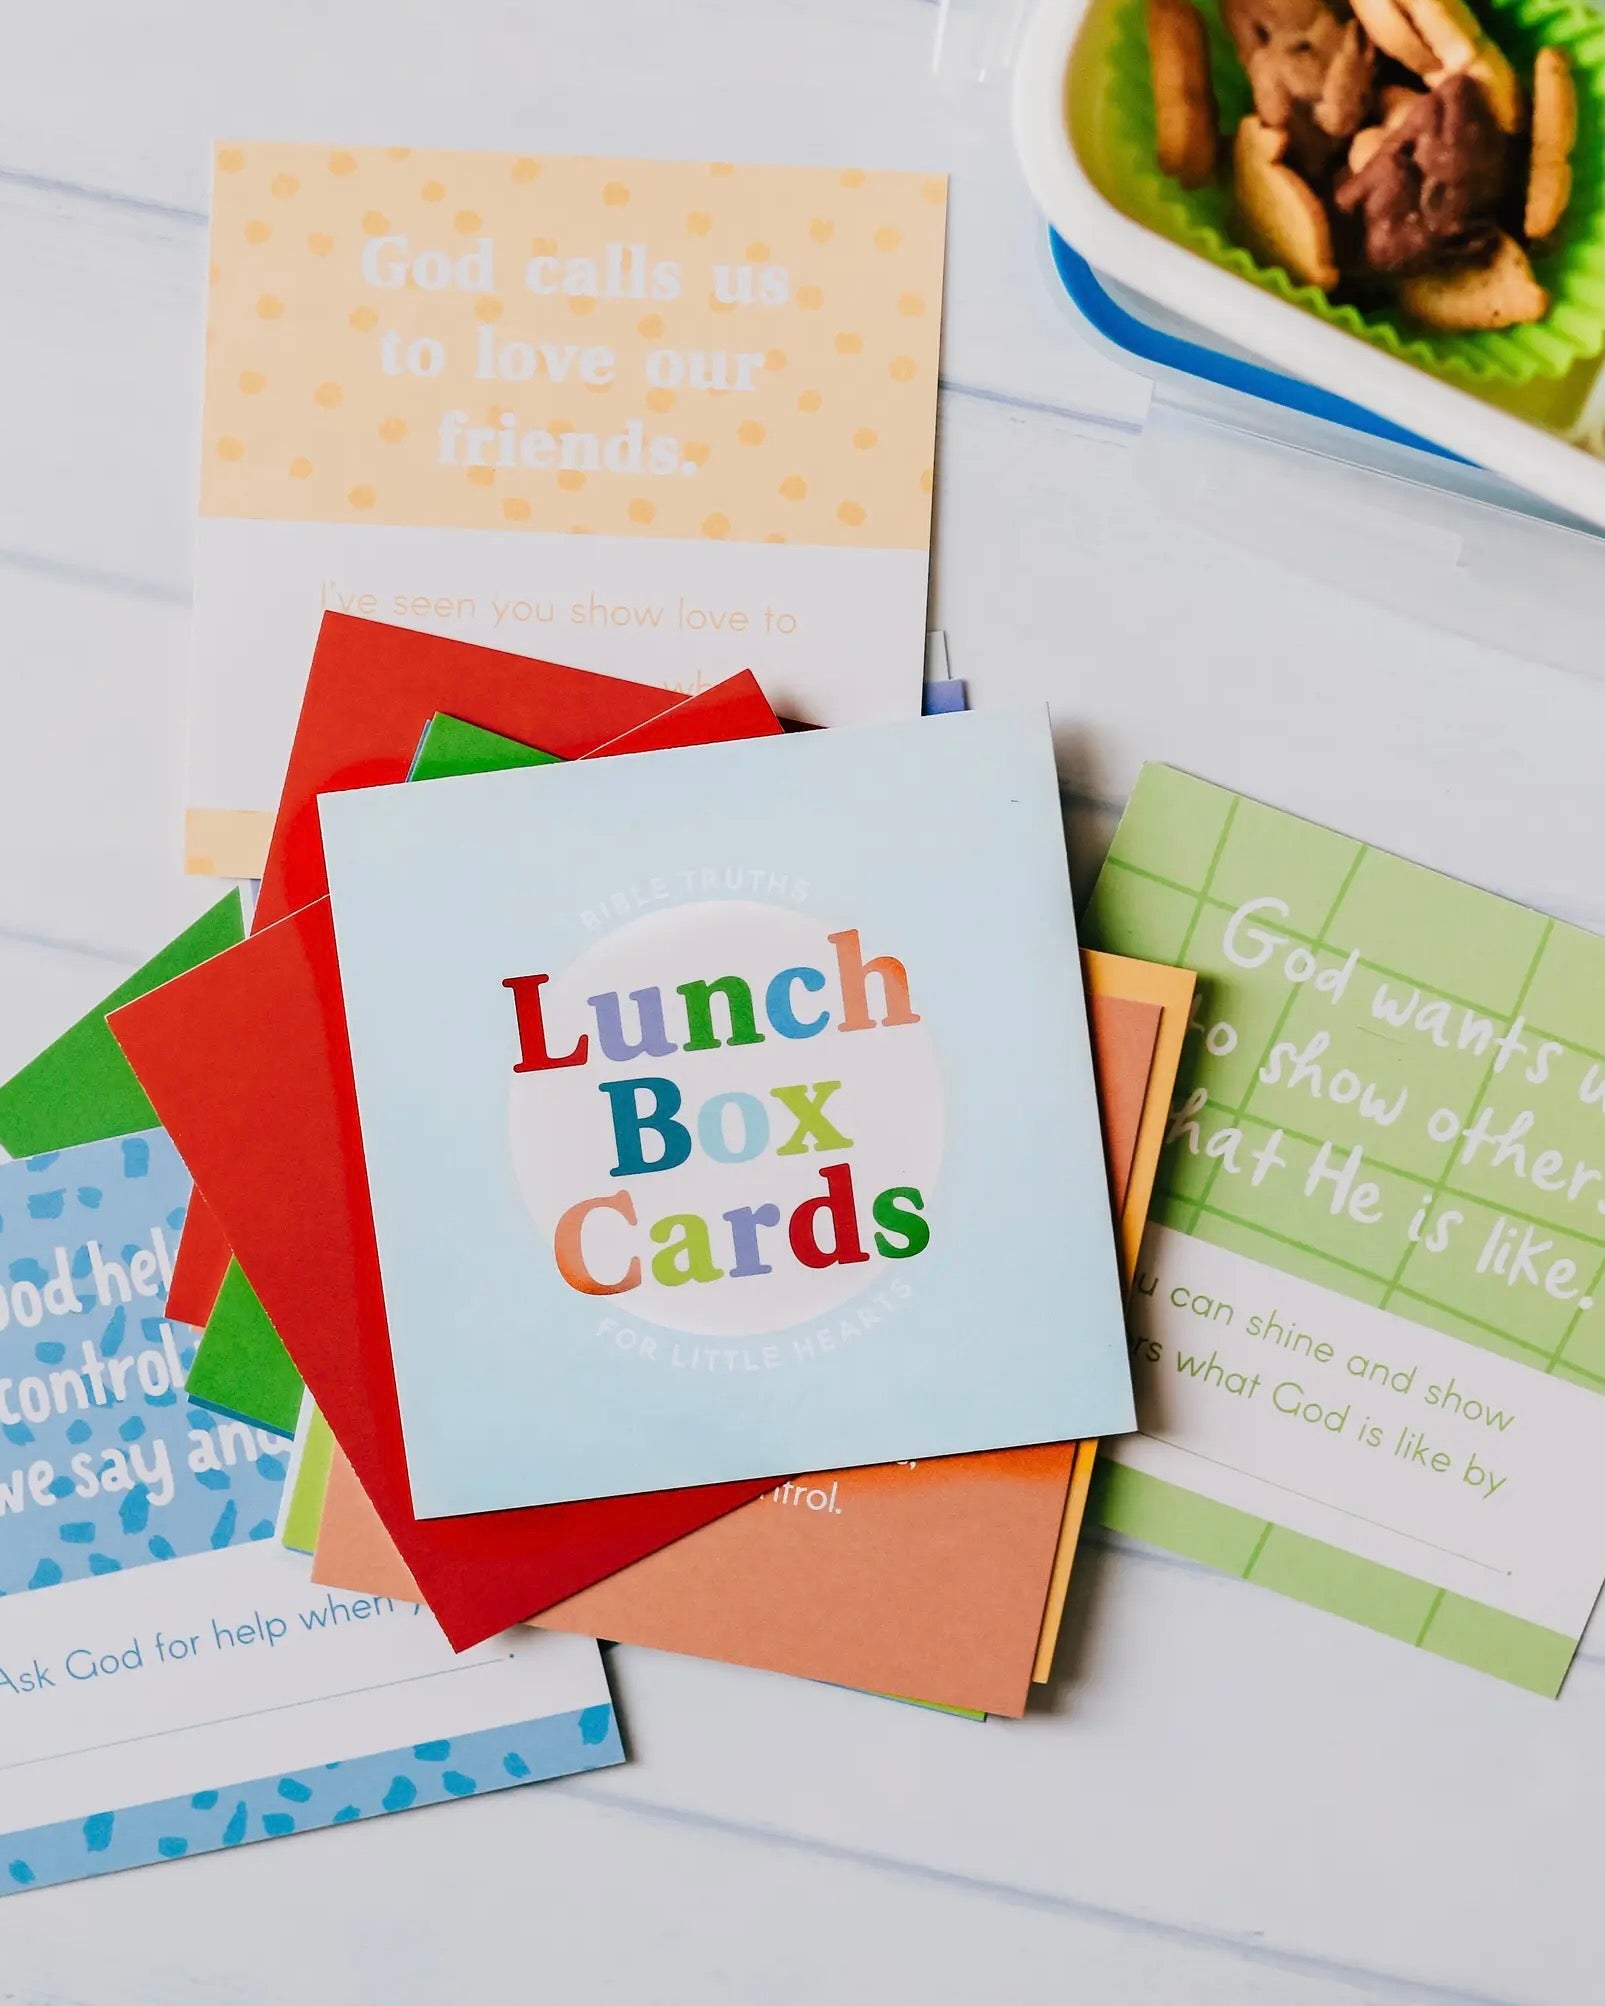 Lunch Box Cards